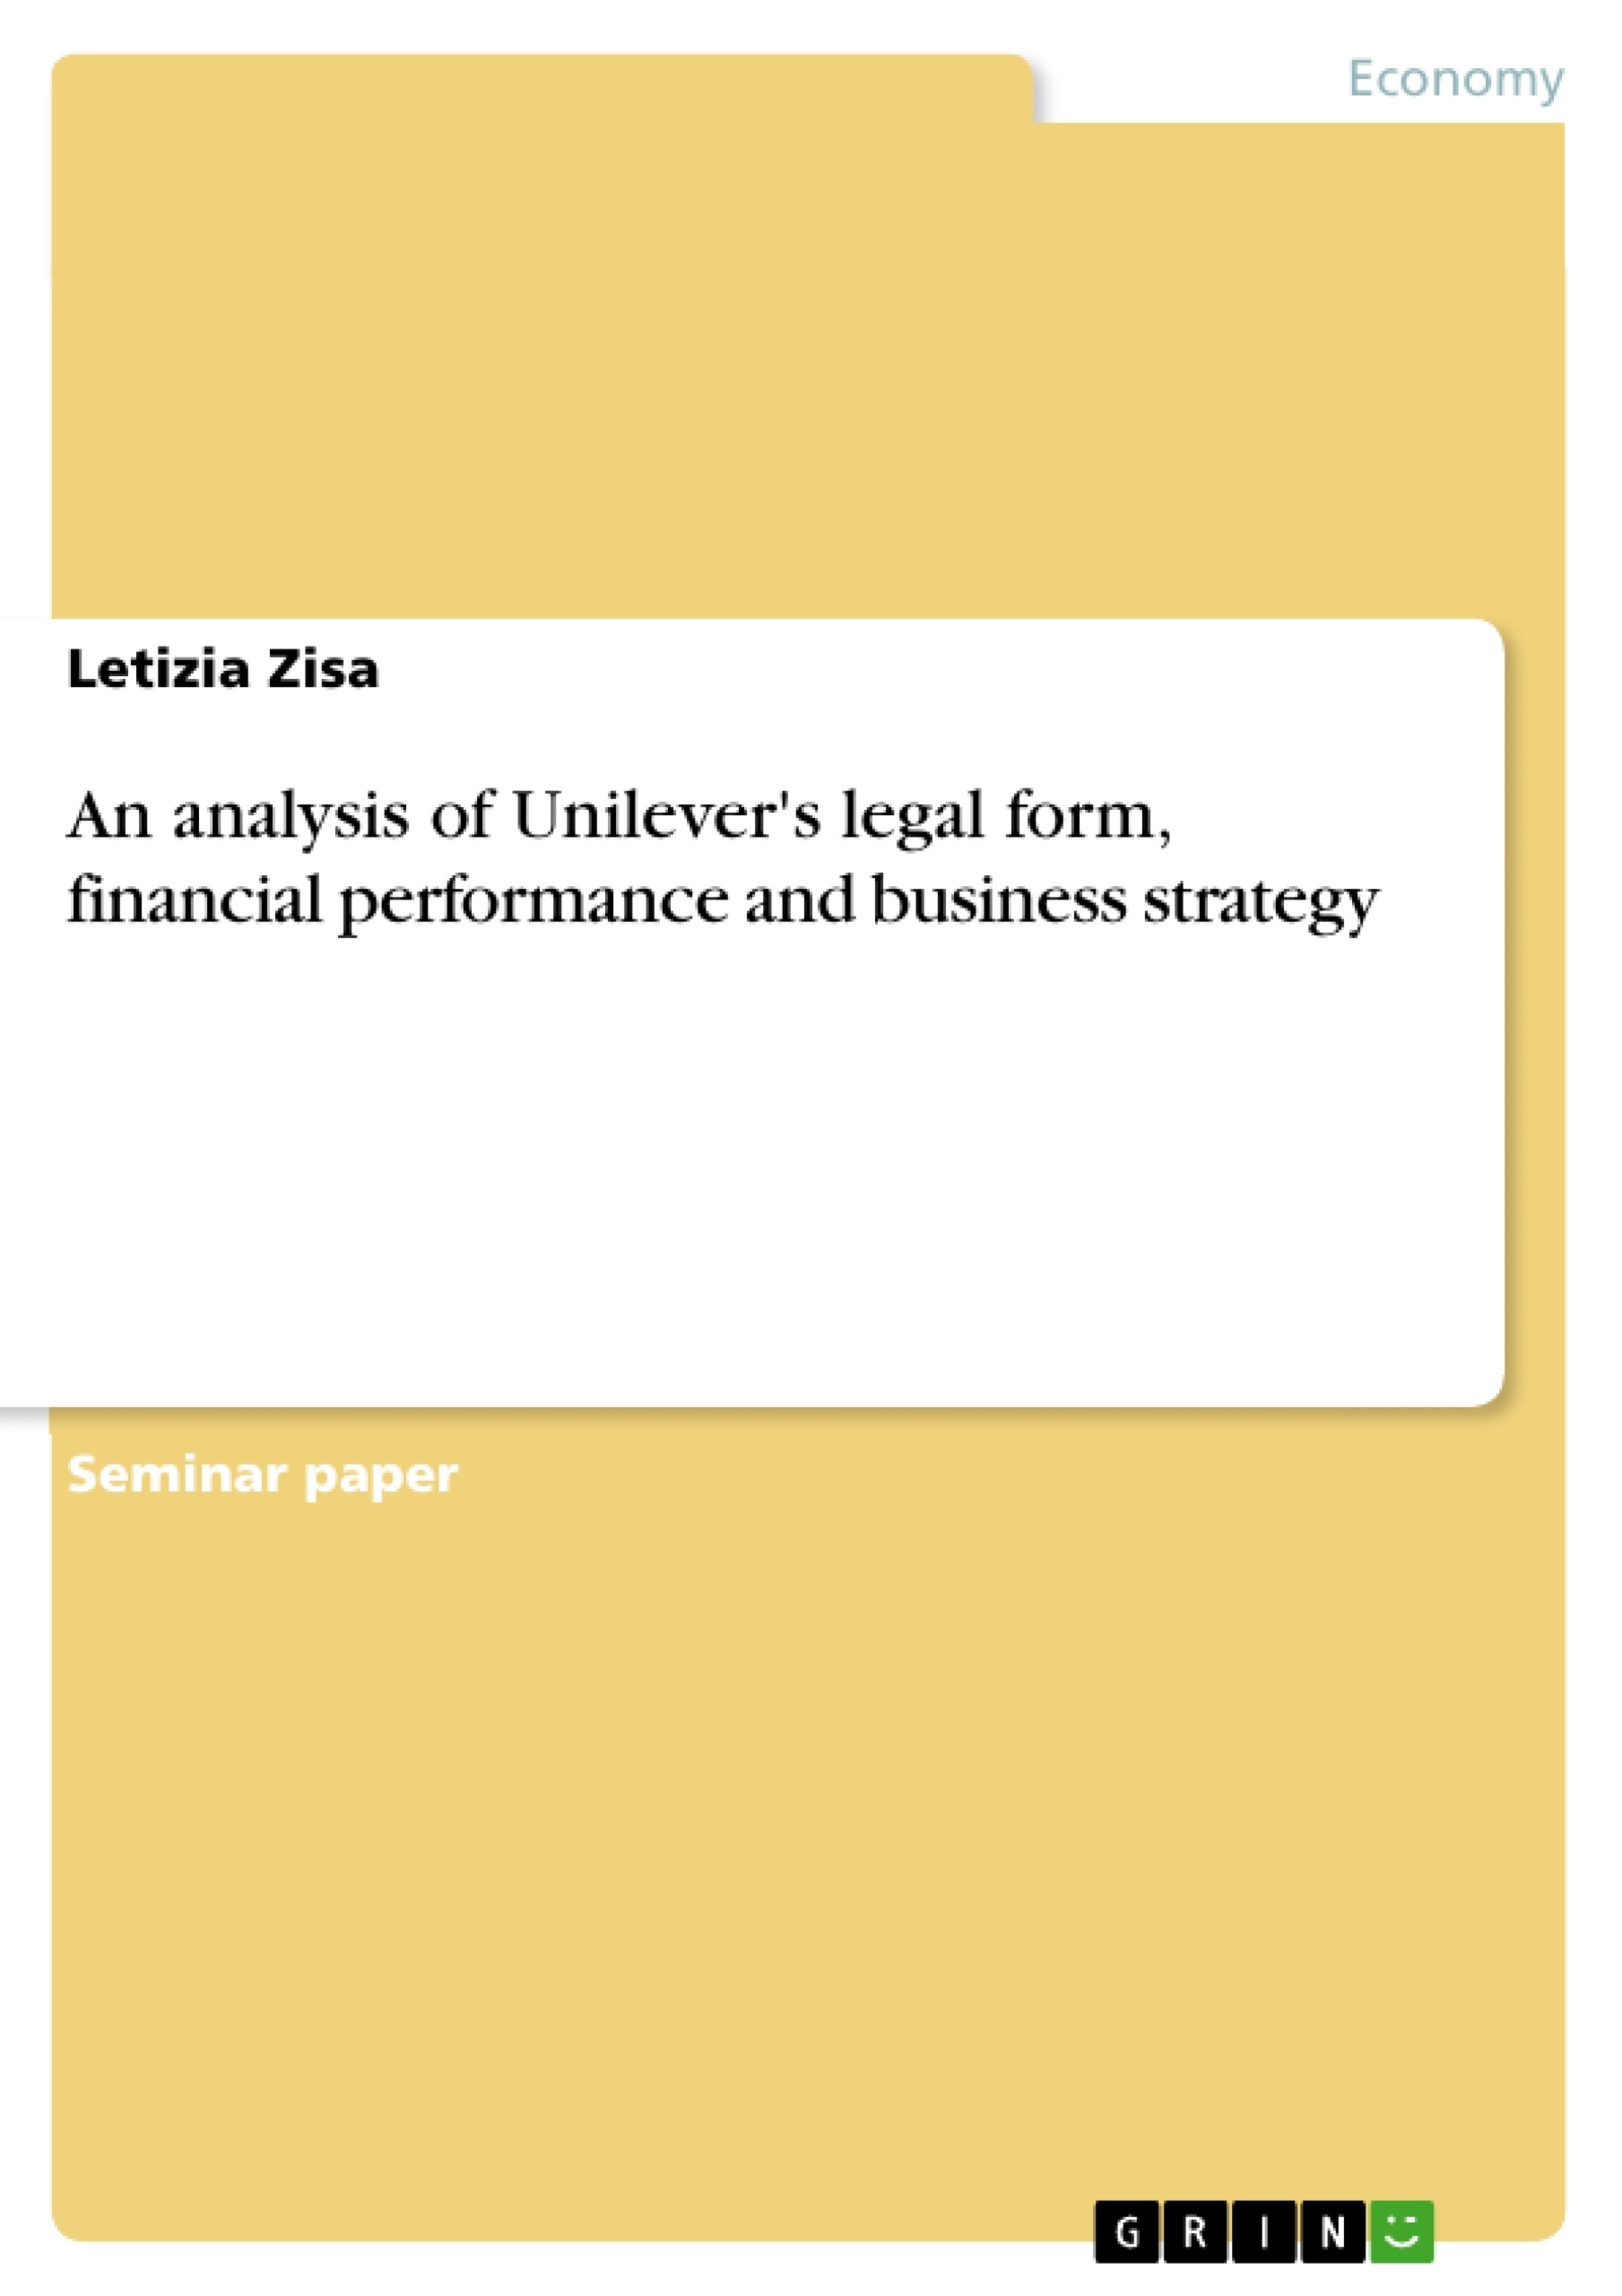 Titel: An analysis of Unilever's legal form, financial performance and business strategy